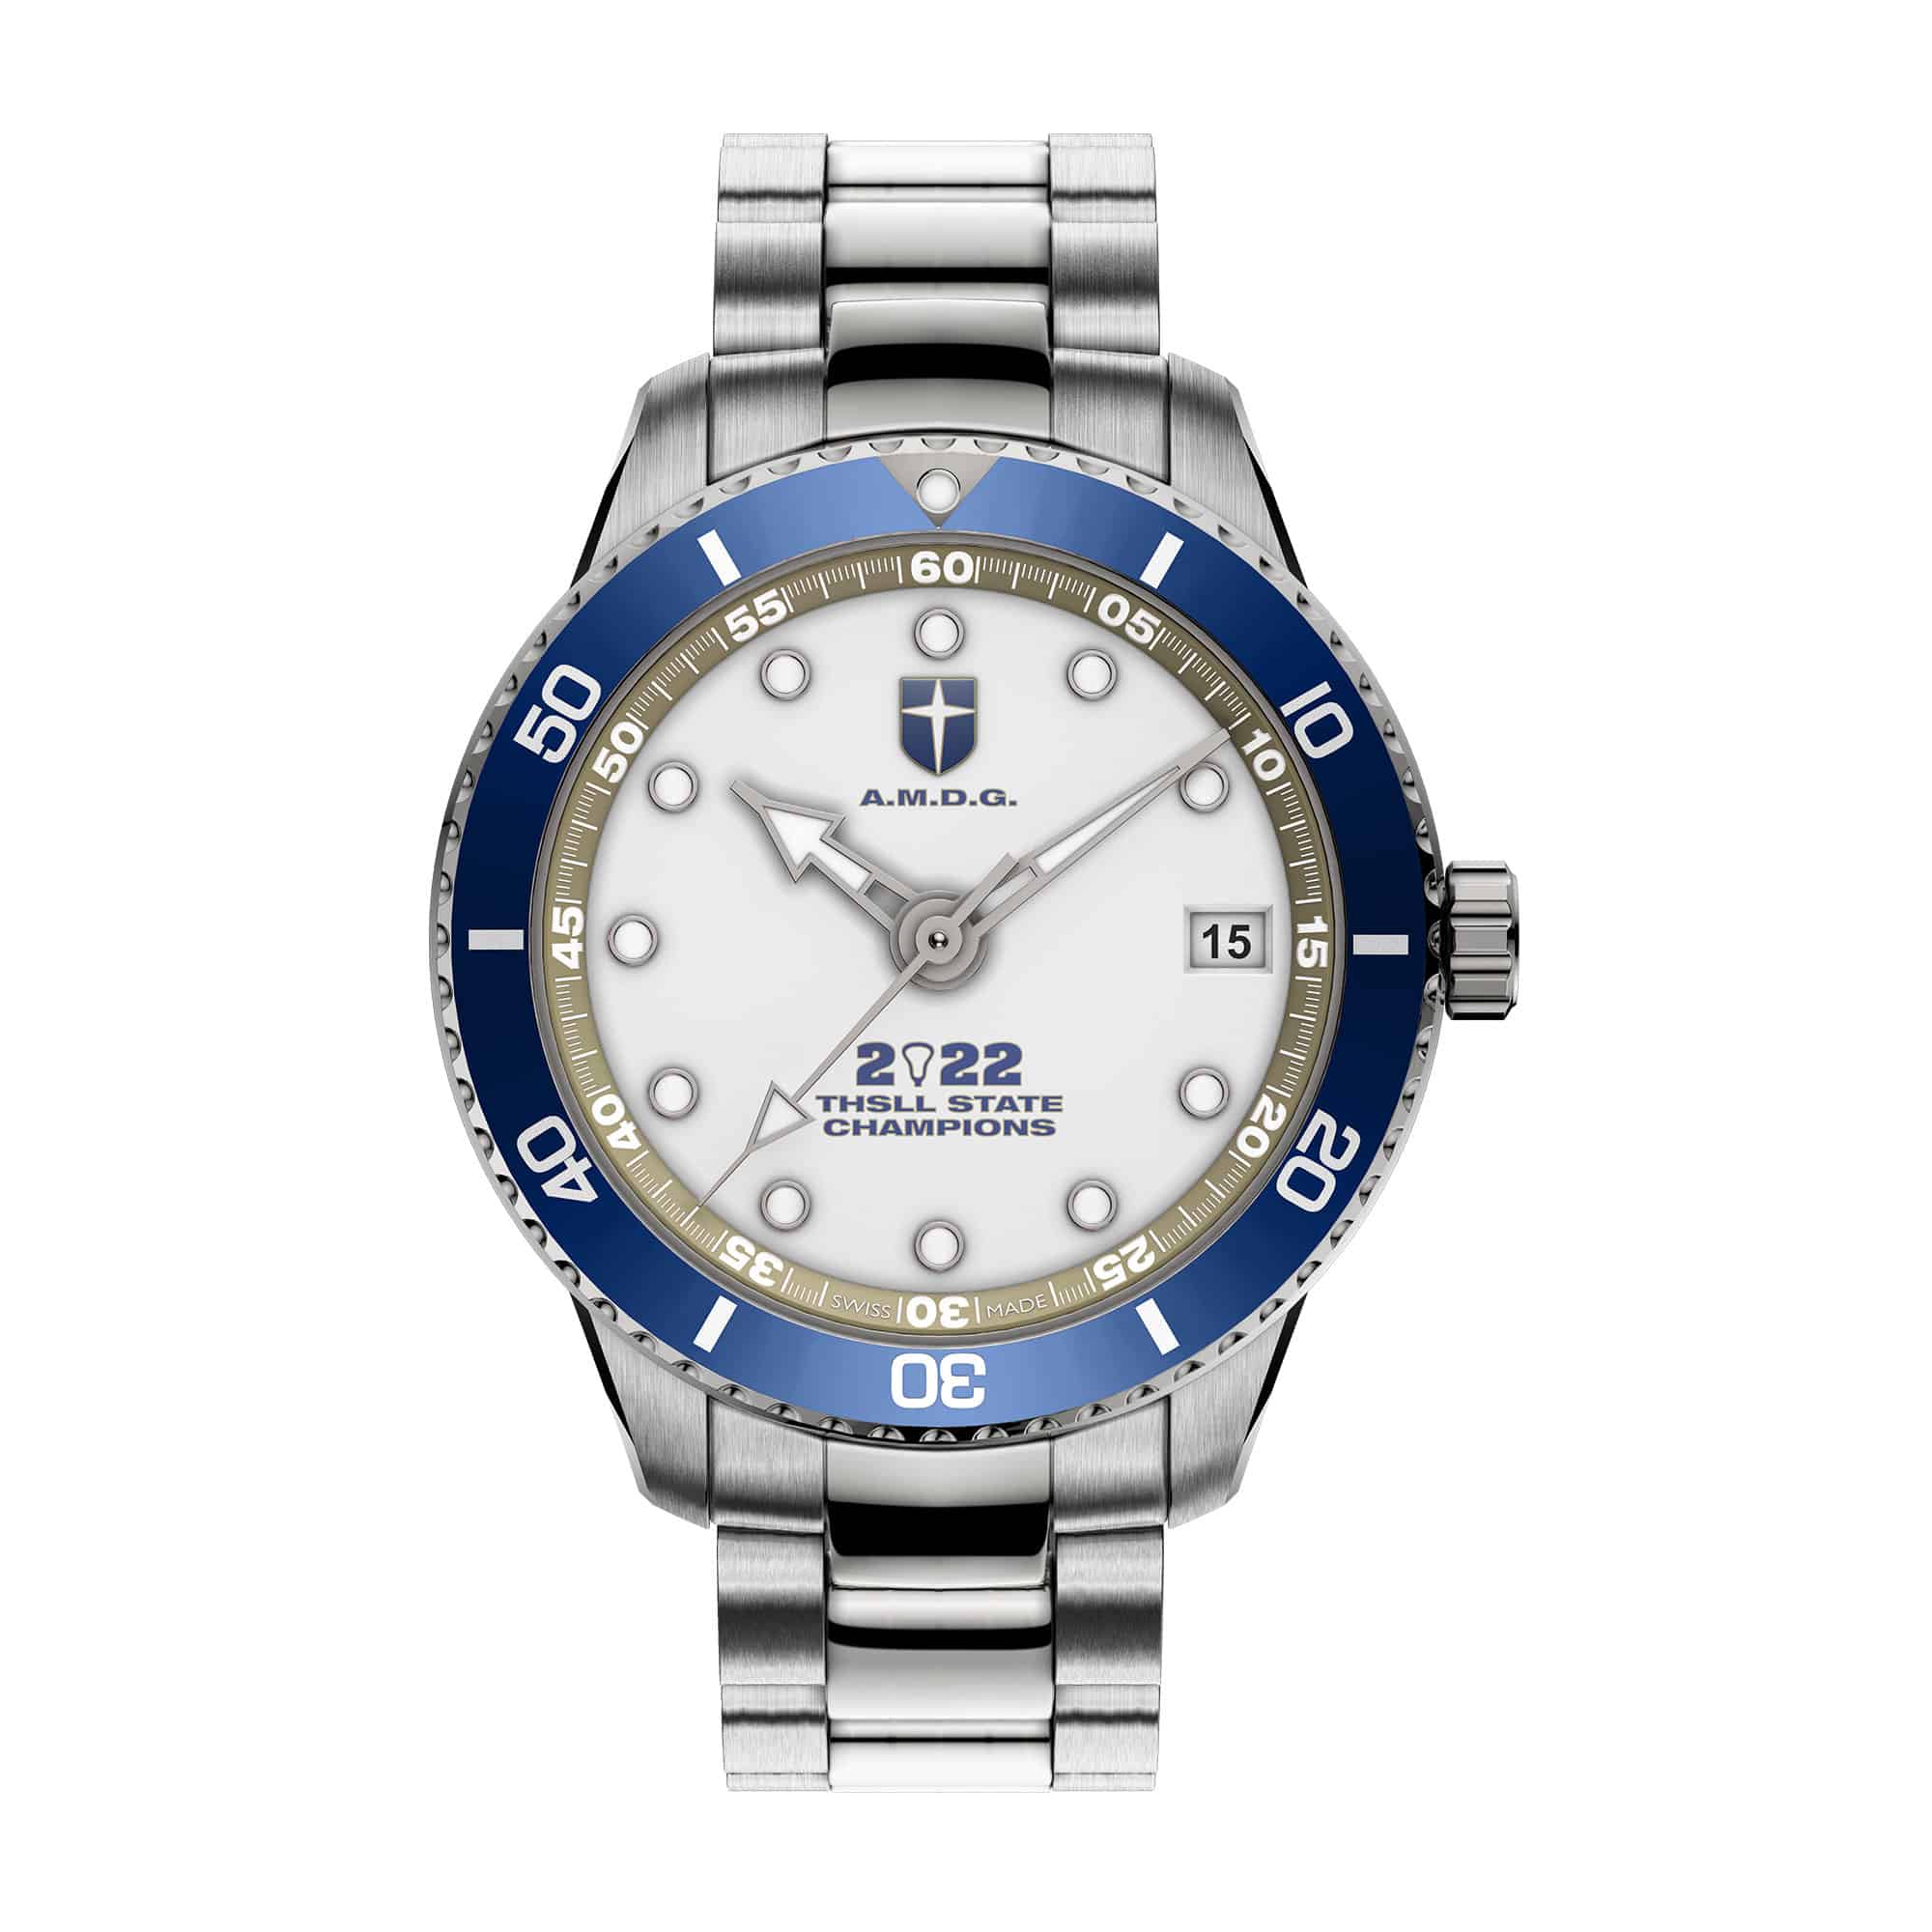 Jesuit Dallas 2022 THSLL State Champions Swiss made automatic watch. Front view.